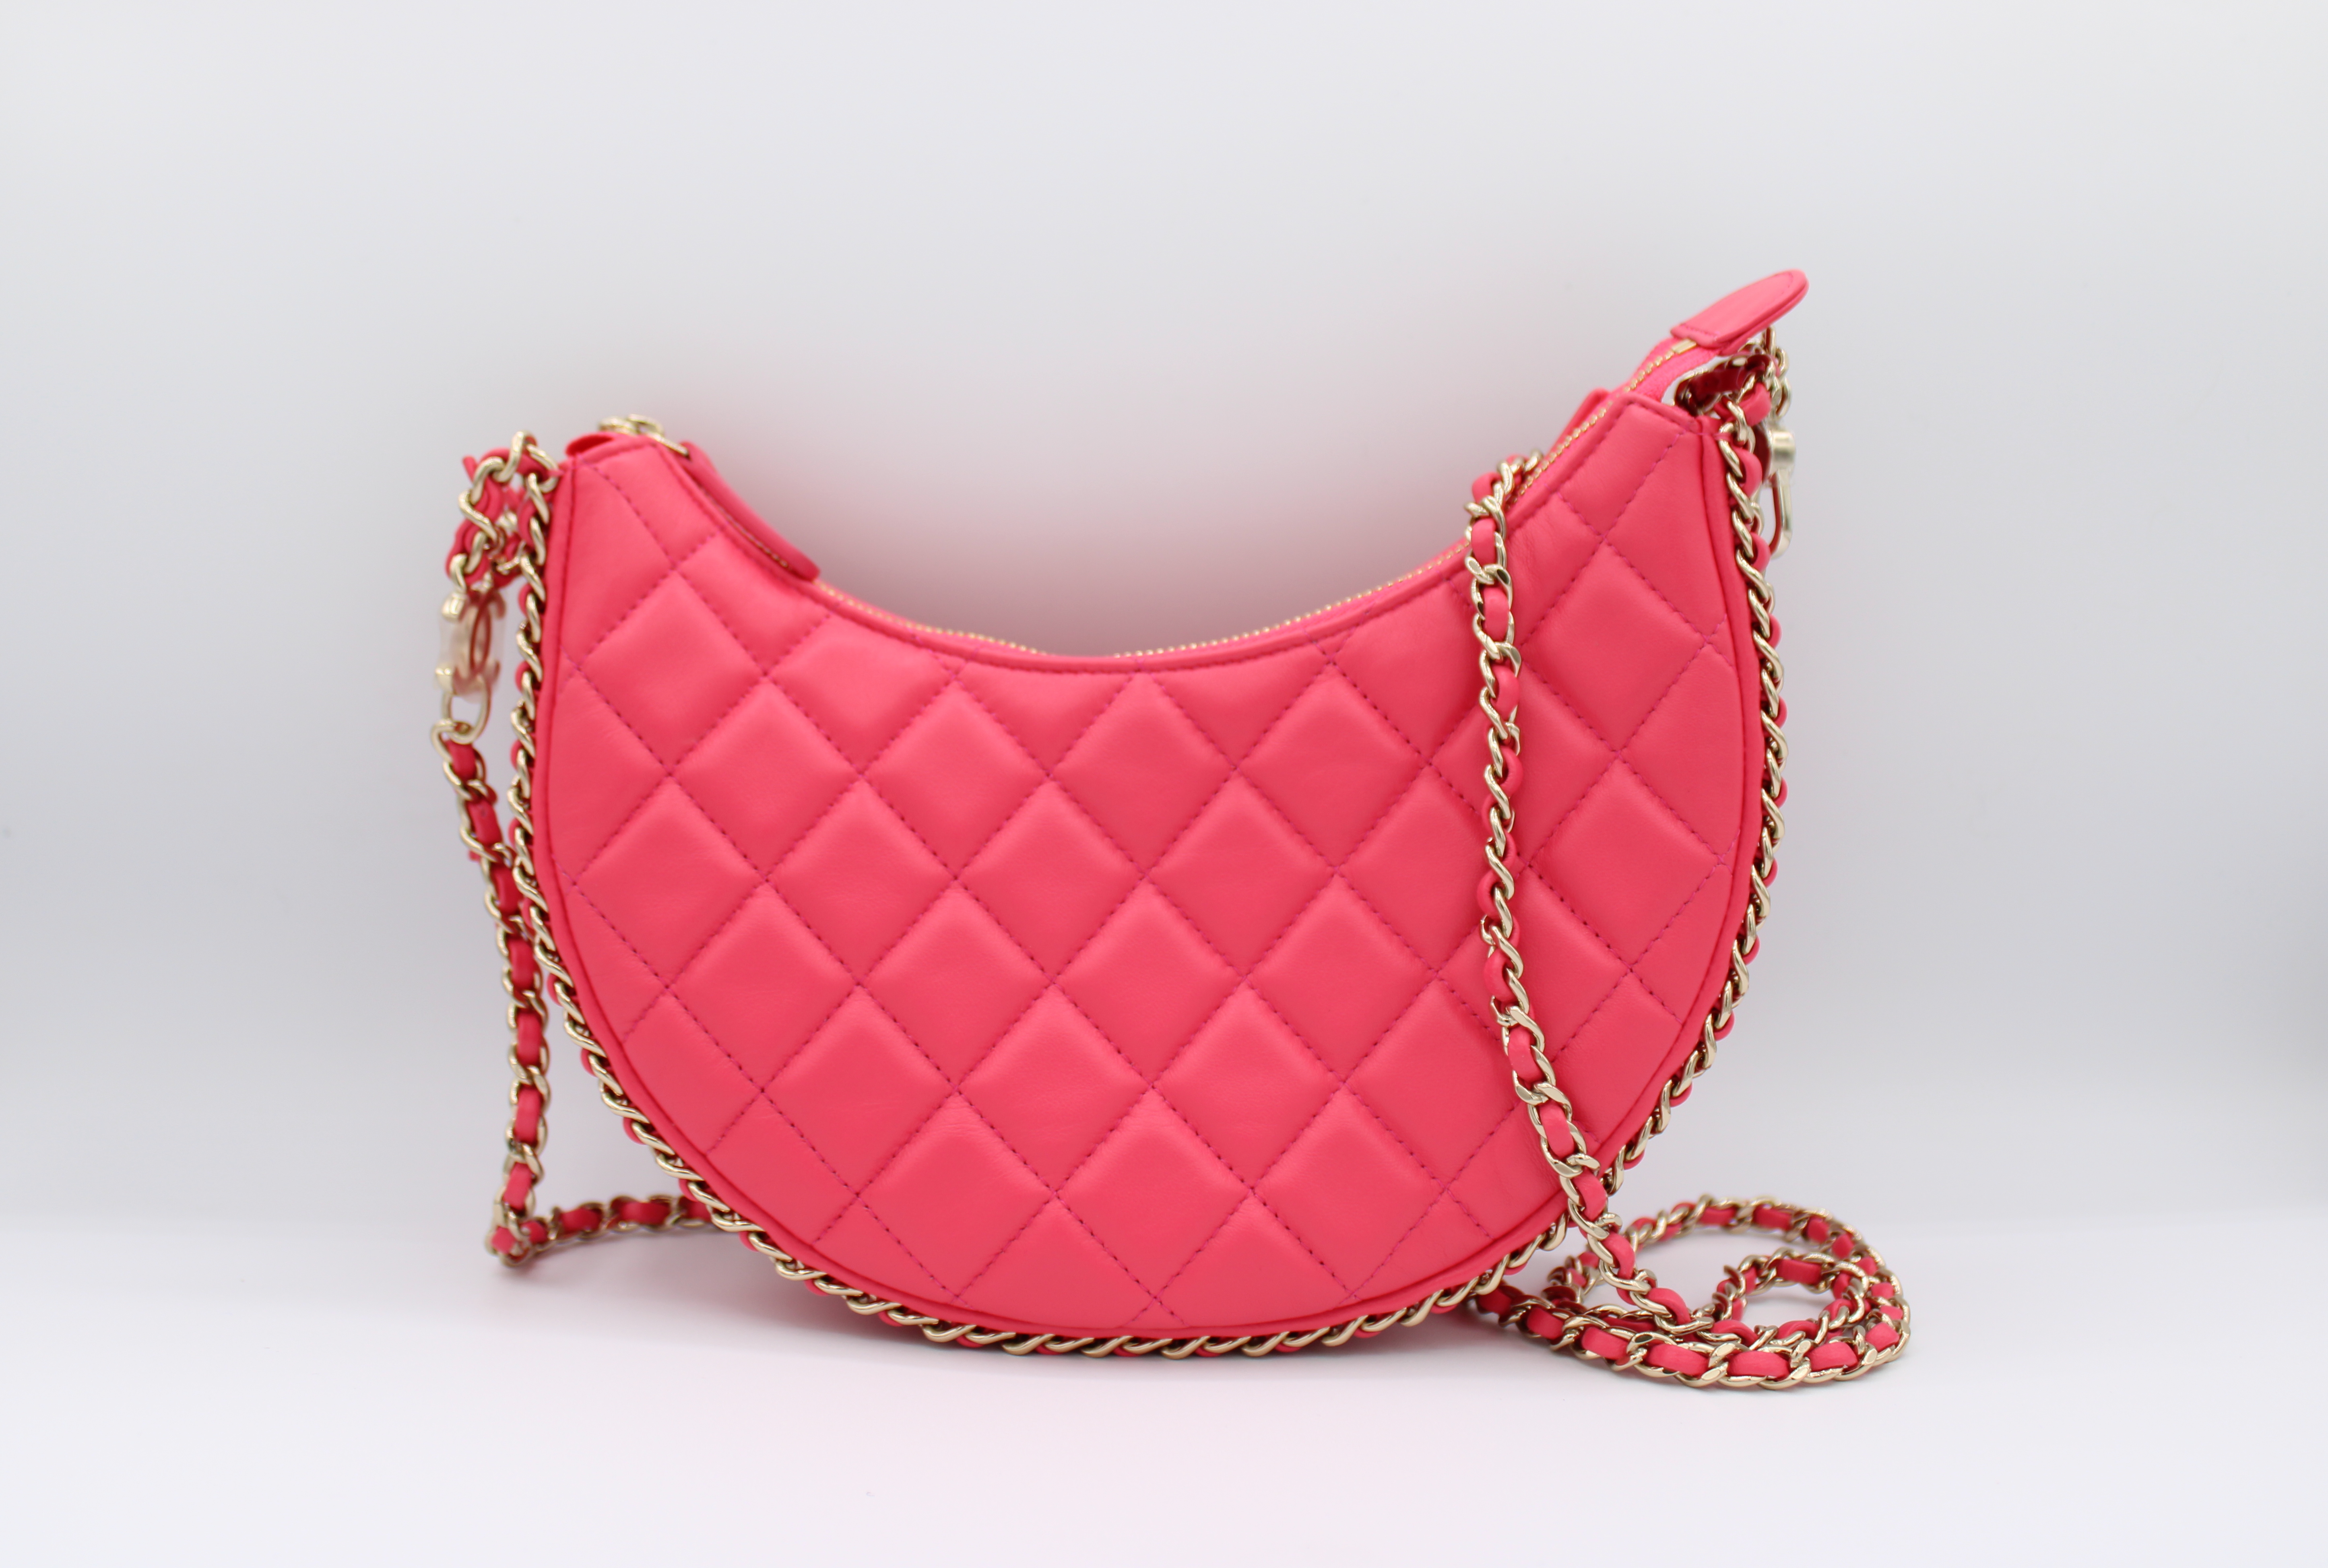 n 5 chanel red bag